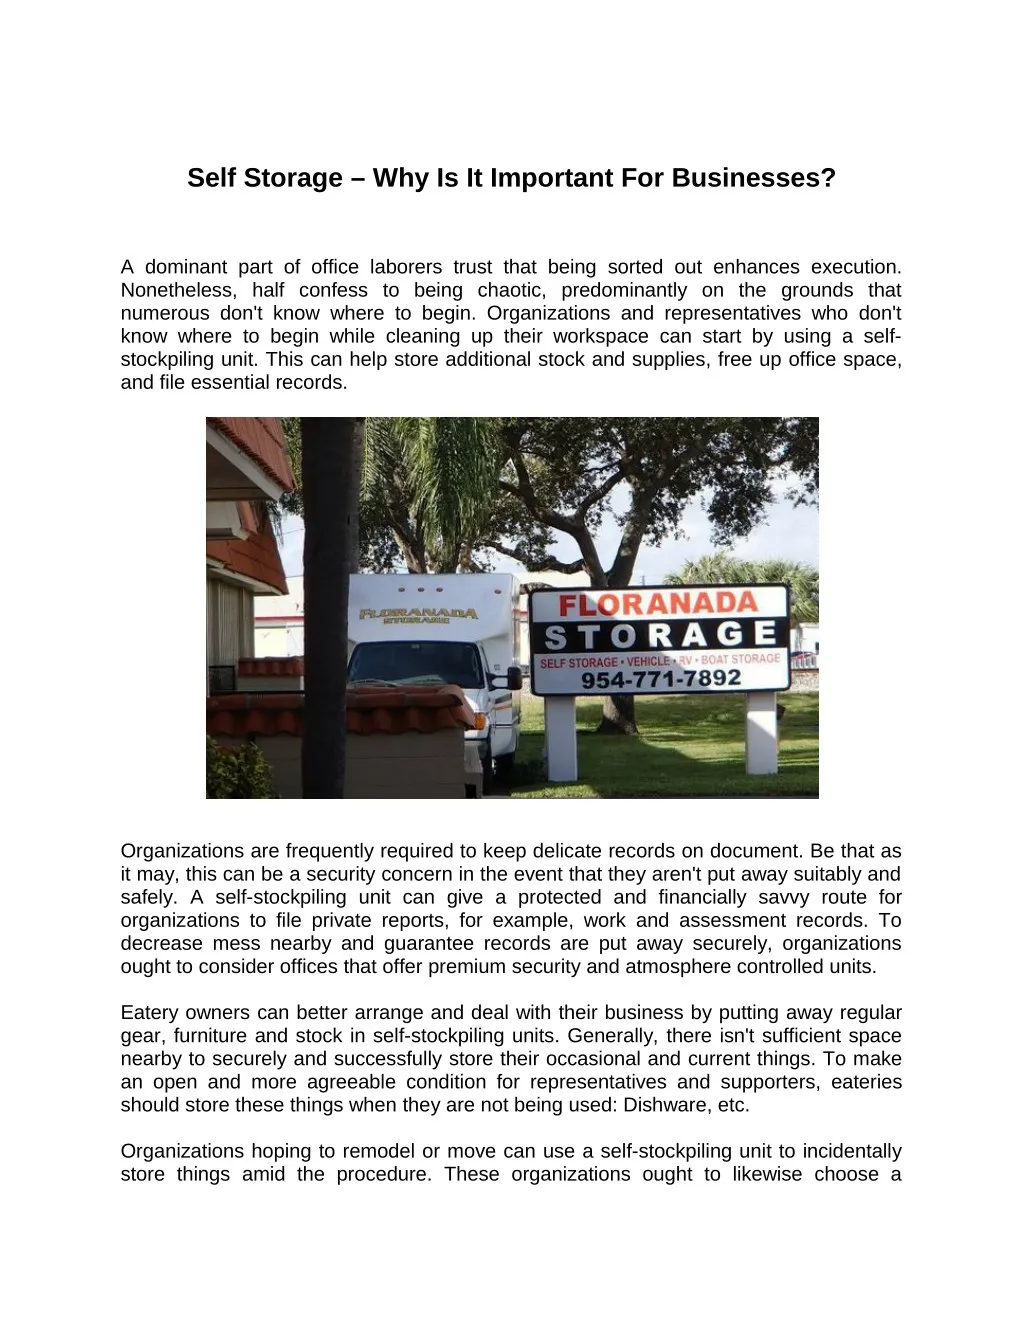 self storage why is it important for businesses